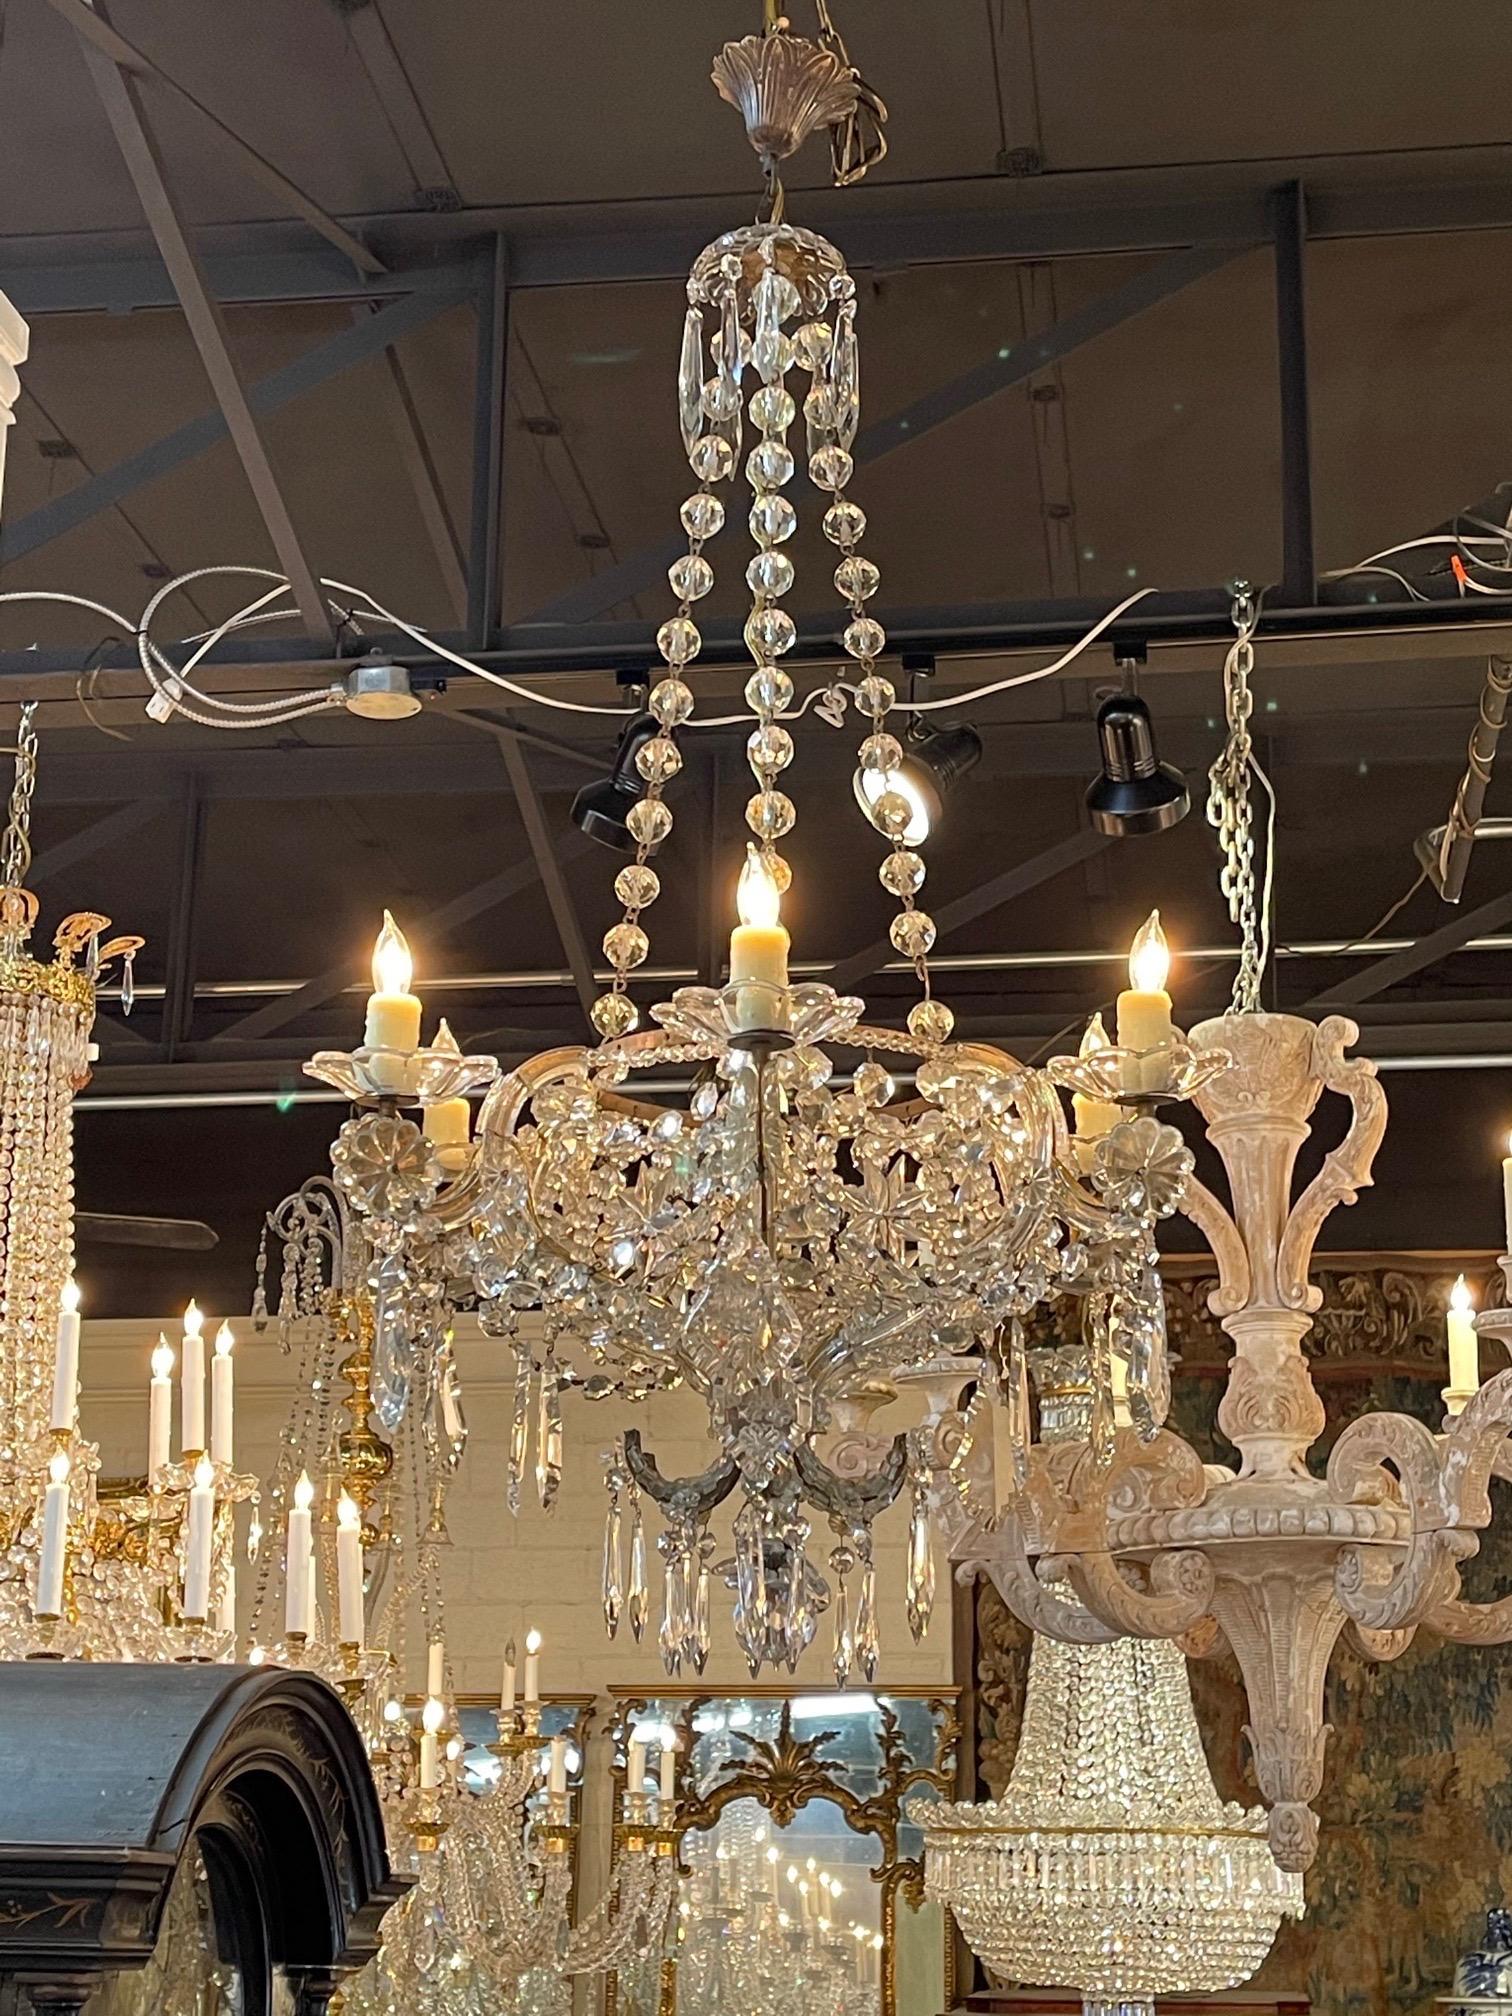 Very fine 19th century Italian crystal 6 light chandelier. Lovely basket shape along with a variety of beads, crystals and prisms. So elegant!!